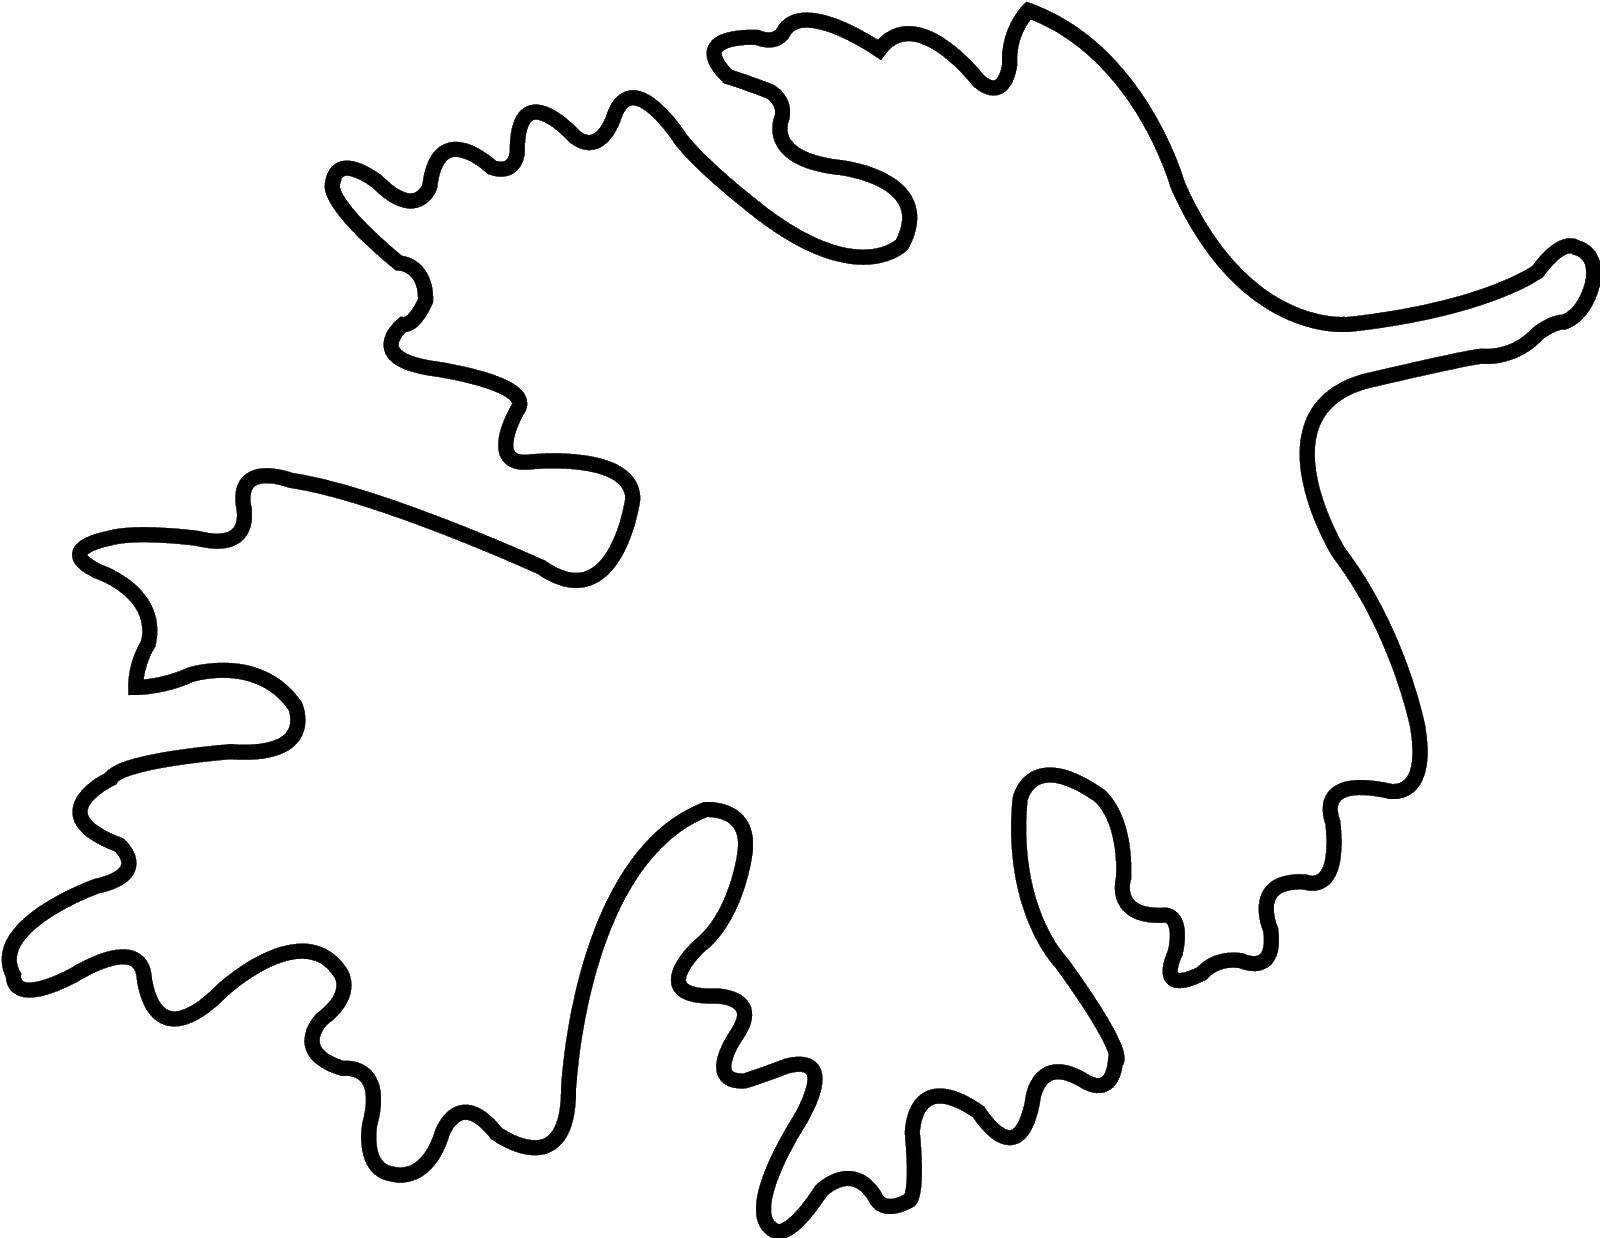 Coloring Outline oak leaf. Category The contours of the leaves of the trees. Tags:  Outline .